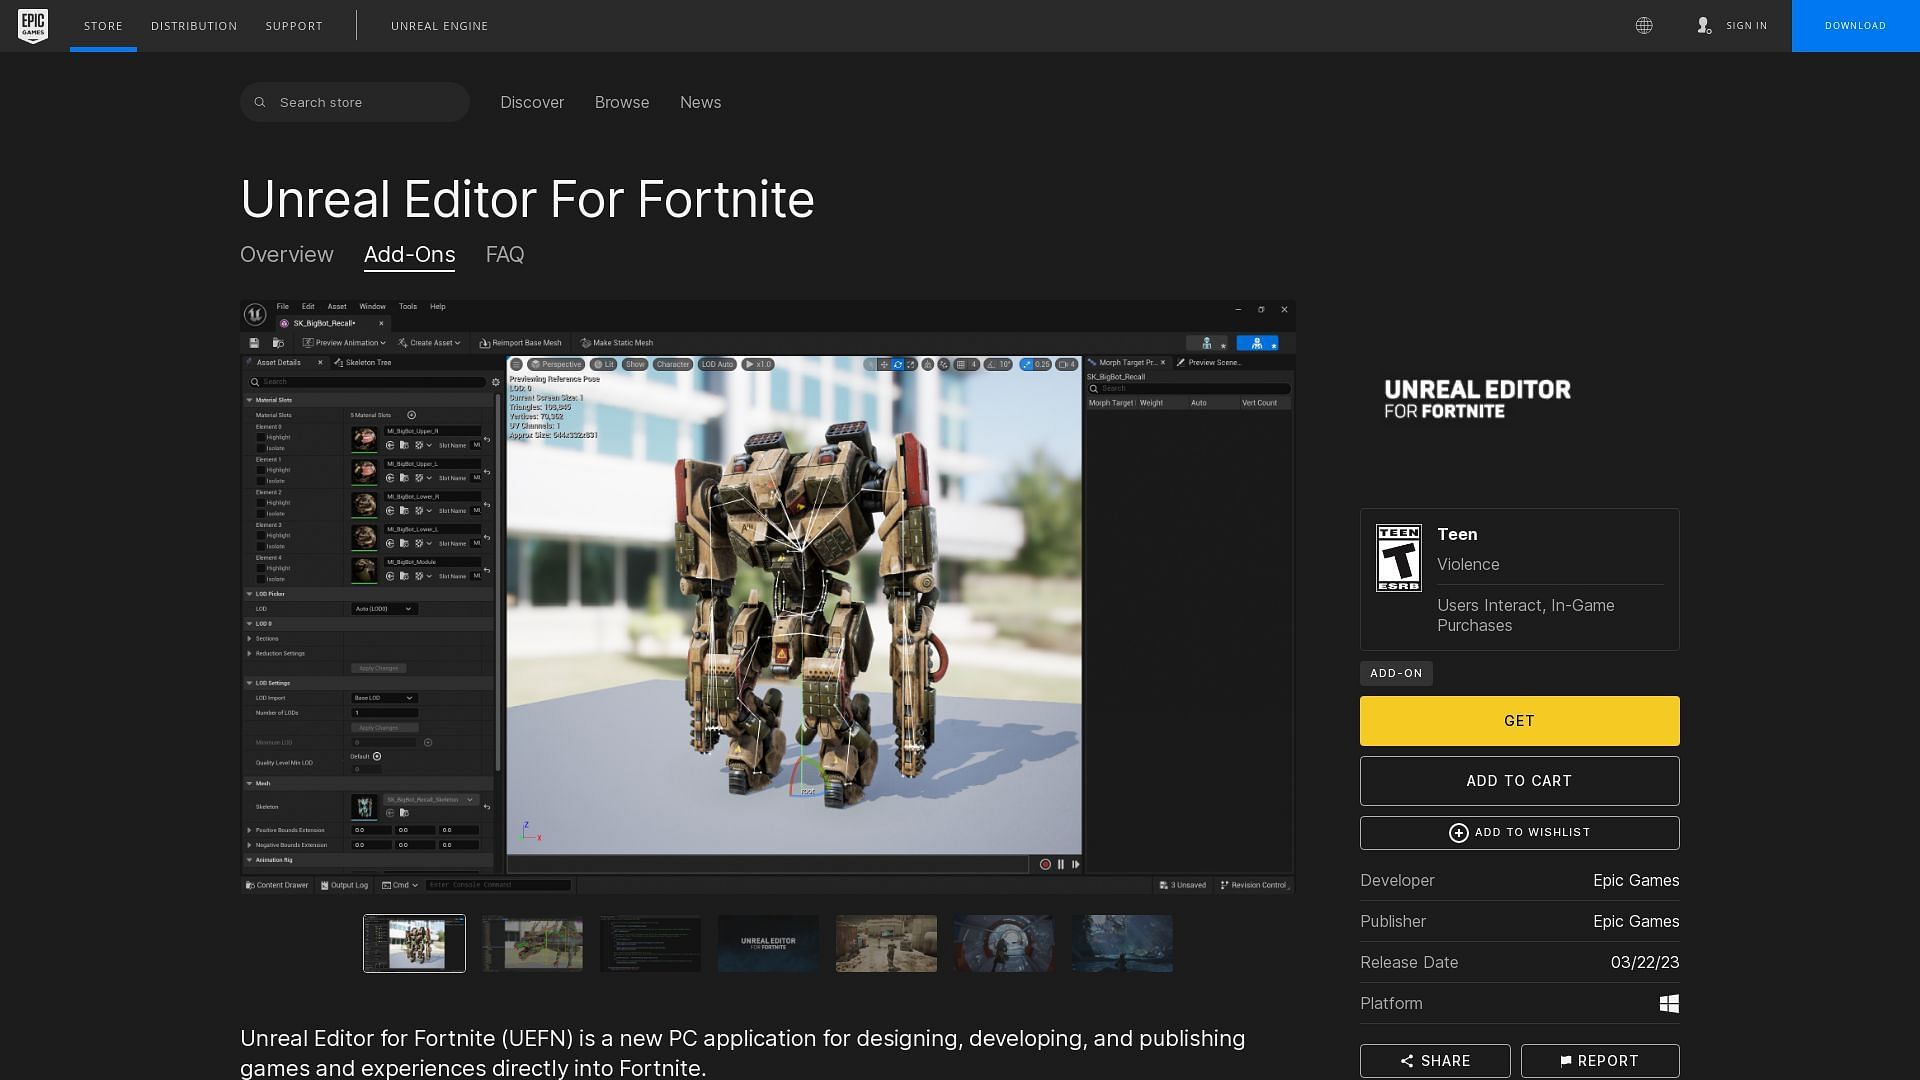 You can download Unreal Editor for Fortnite for free (Image via Epic Games)